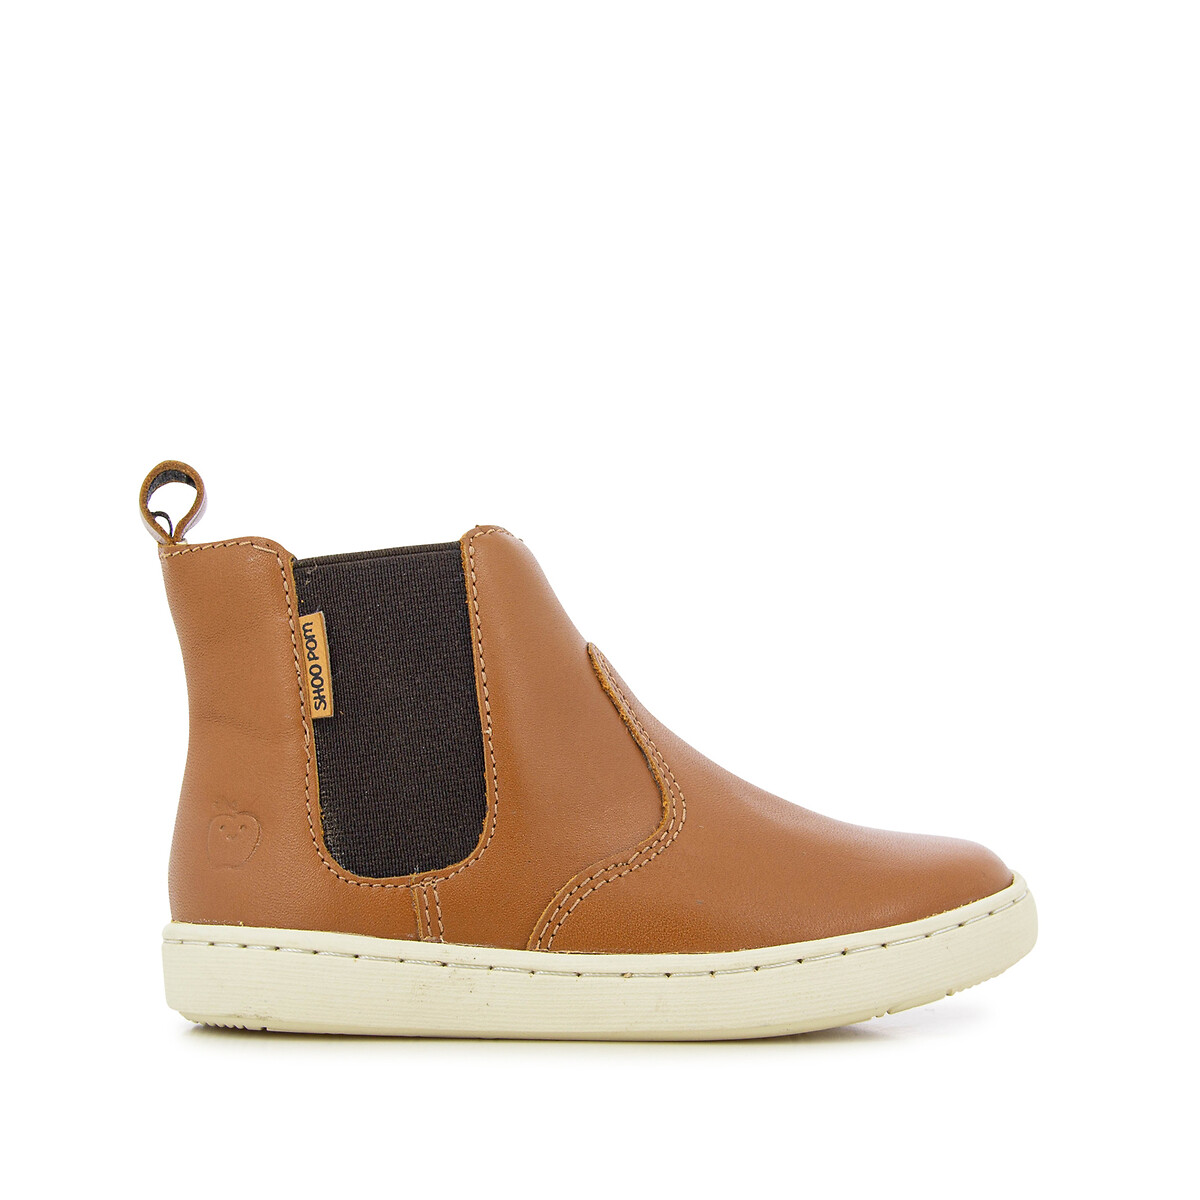 Kids Play Leather Chelsea Boots